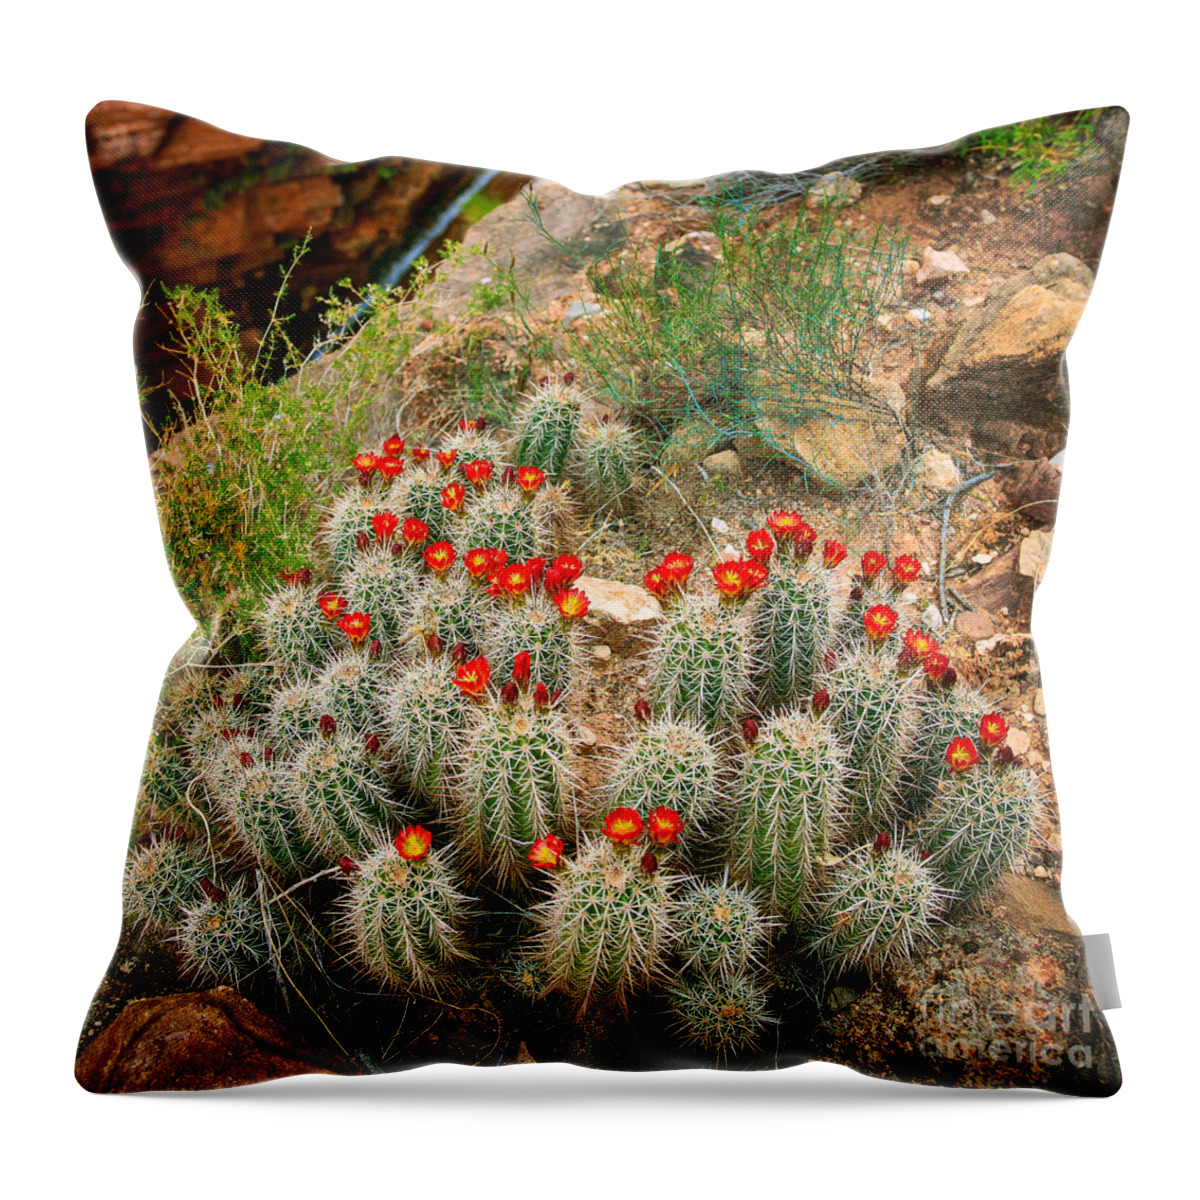 America Throw Pillow featuring the photograph Elves Chasm Cacti by Inge Johnsson